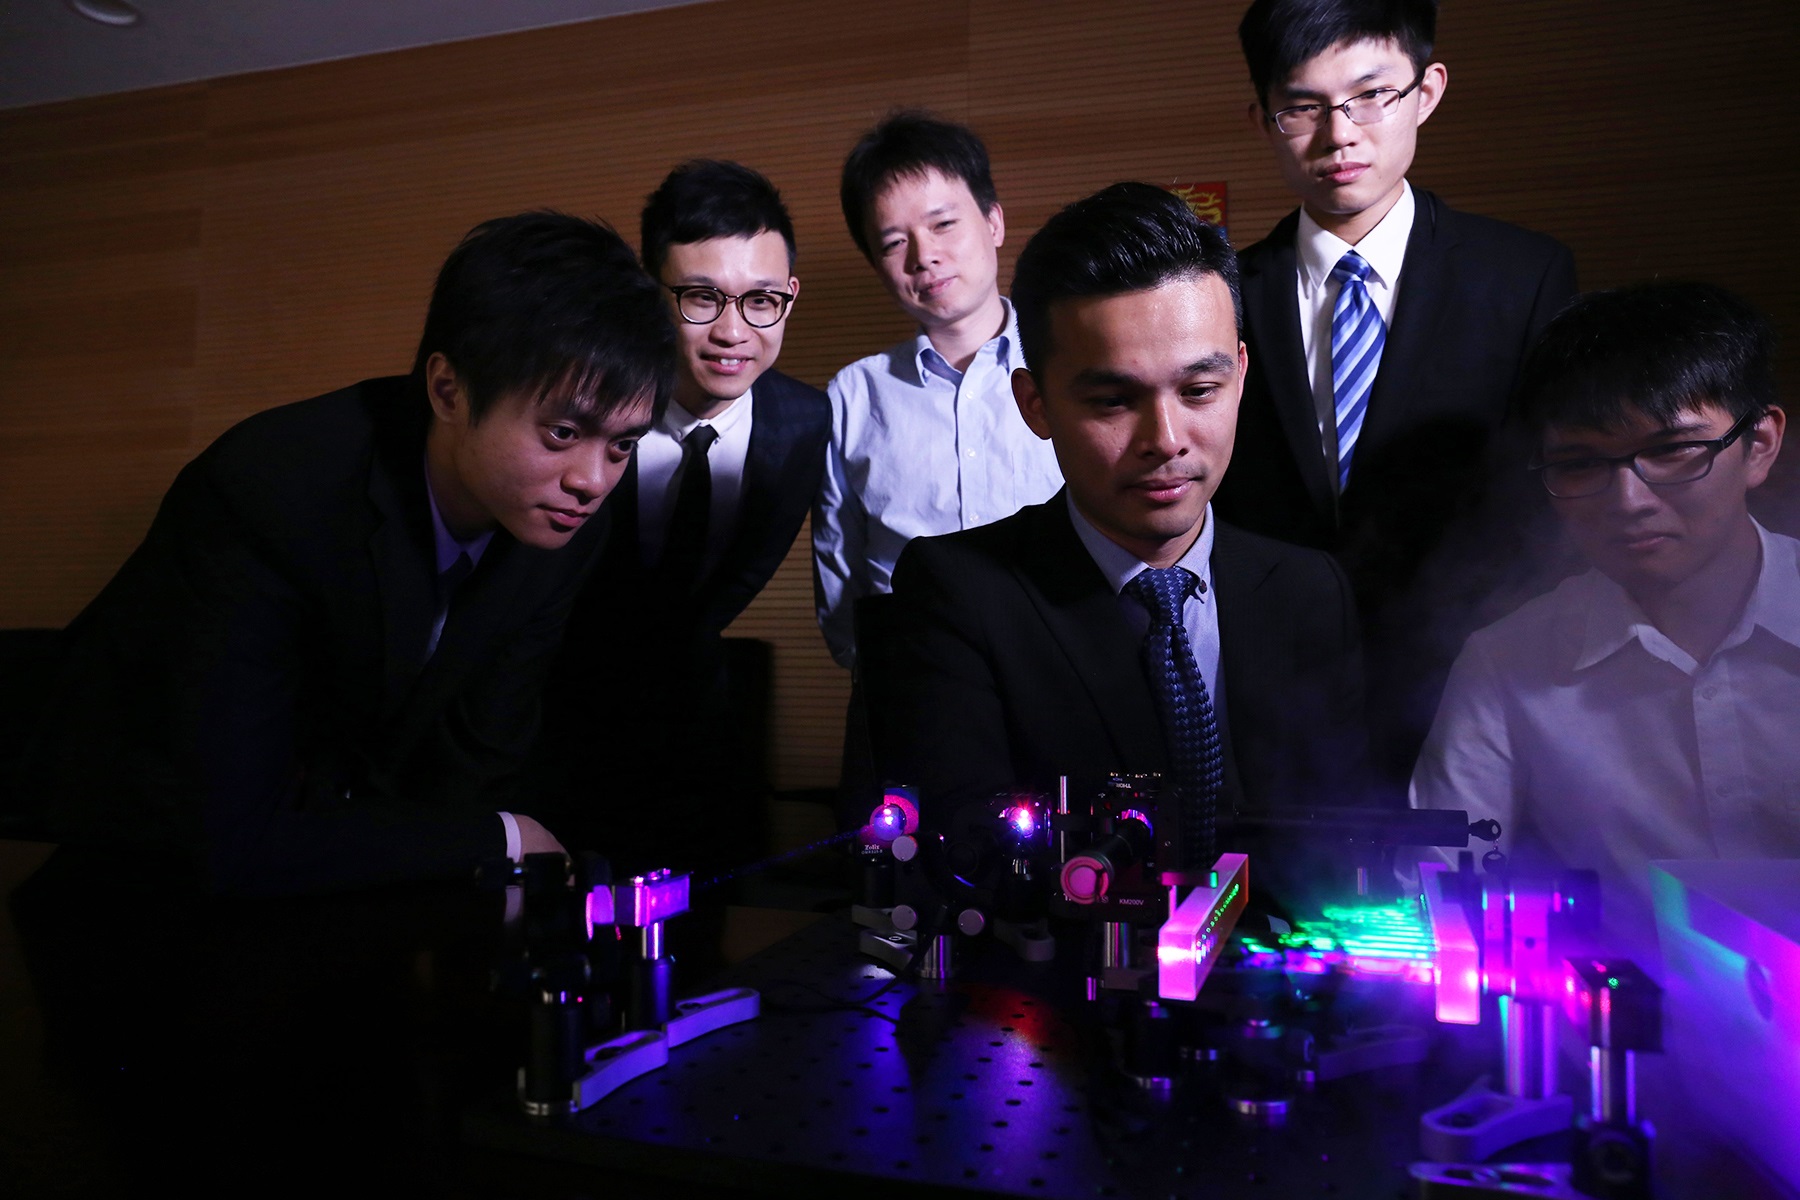 The HKU FACED team led by Dr Kevin Tsia and the laser-scanning device with an infinity mirror